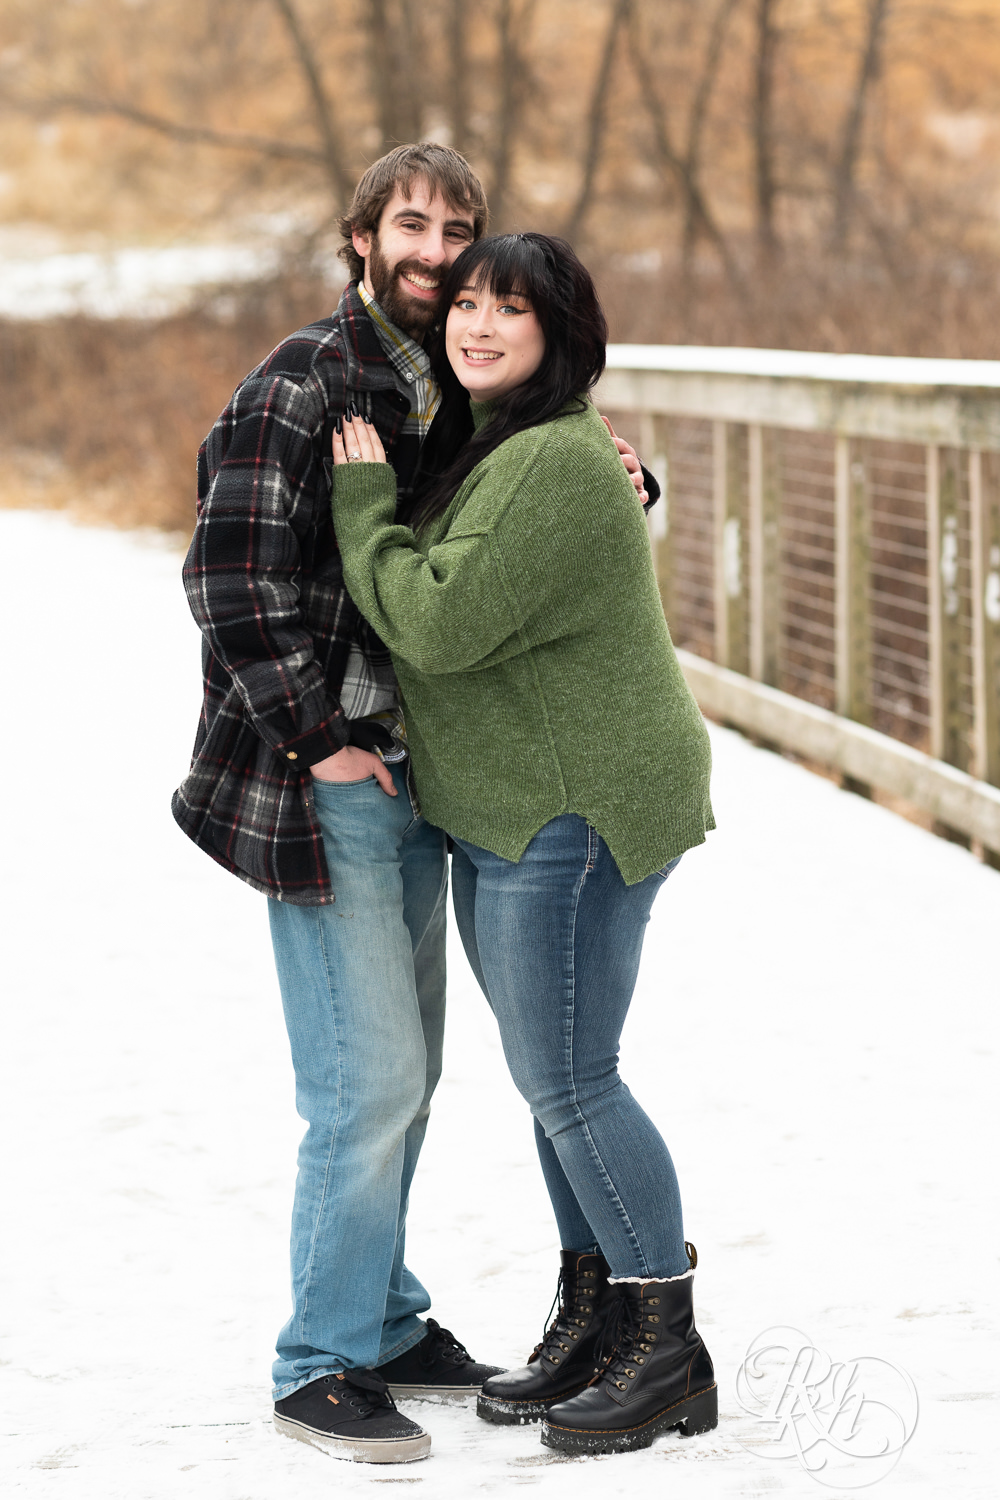 Man in flannel and woman in green sweater and jeans smile on snowy bridge at Lebanon Hills in Eagan, Minnesota.